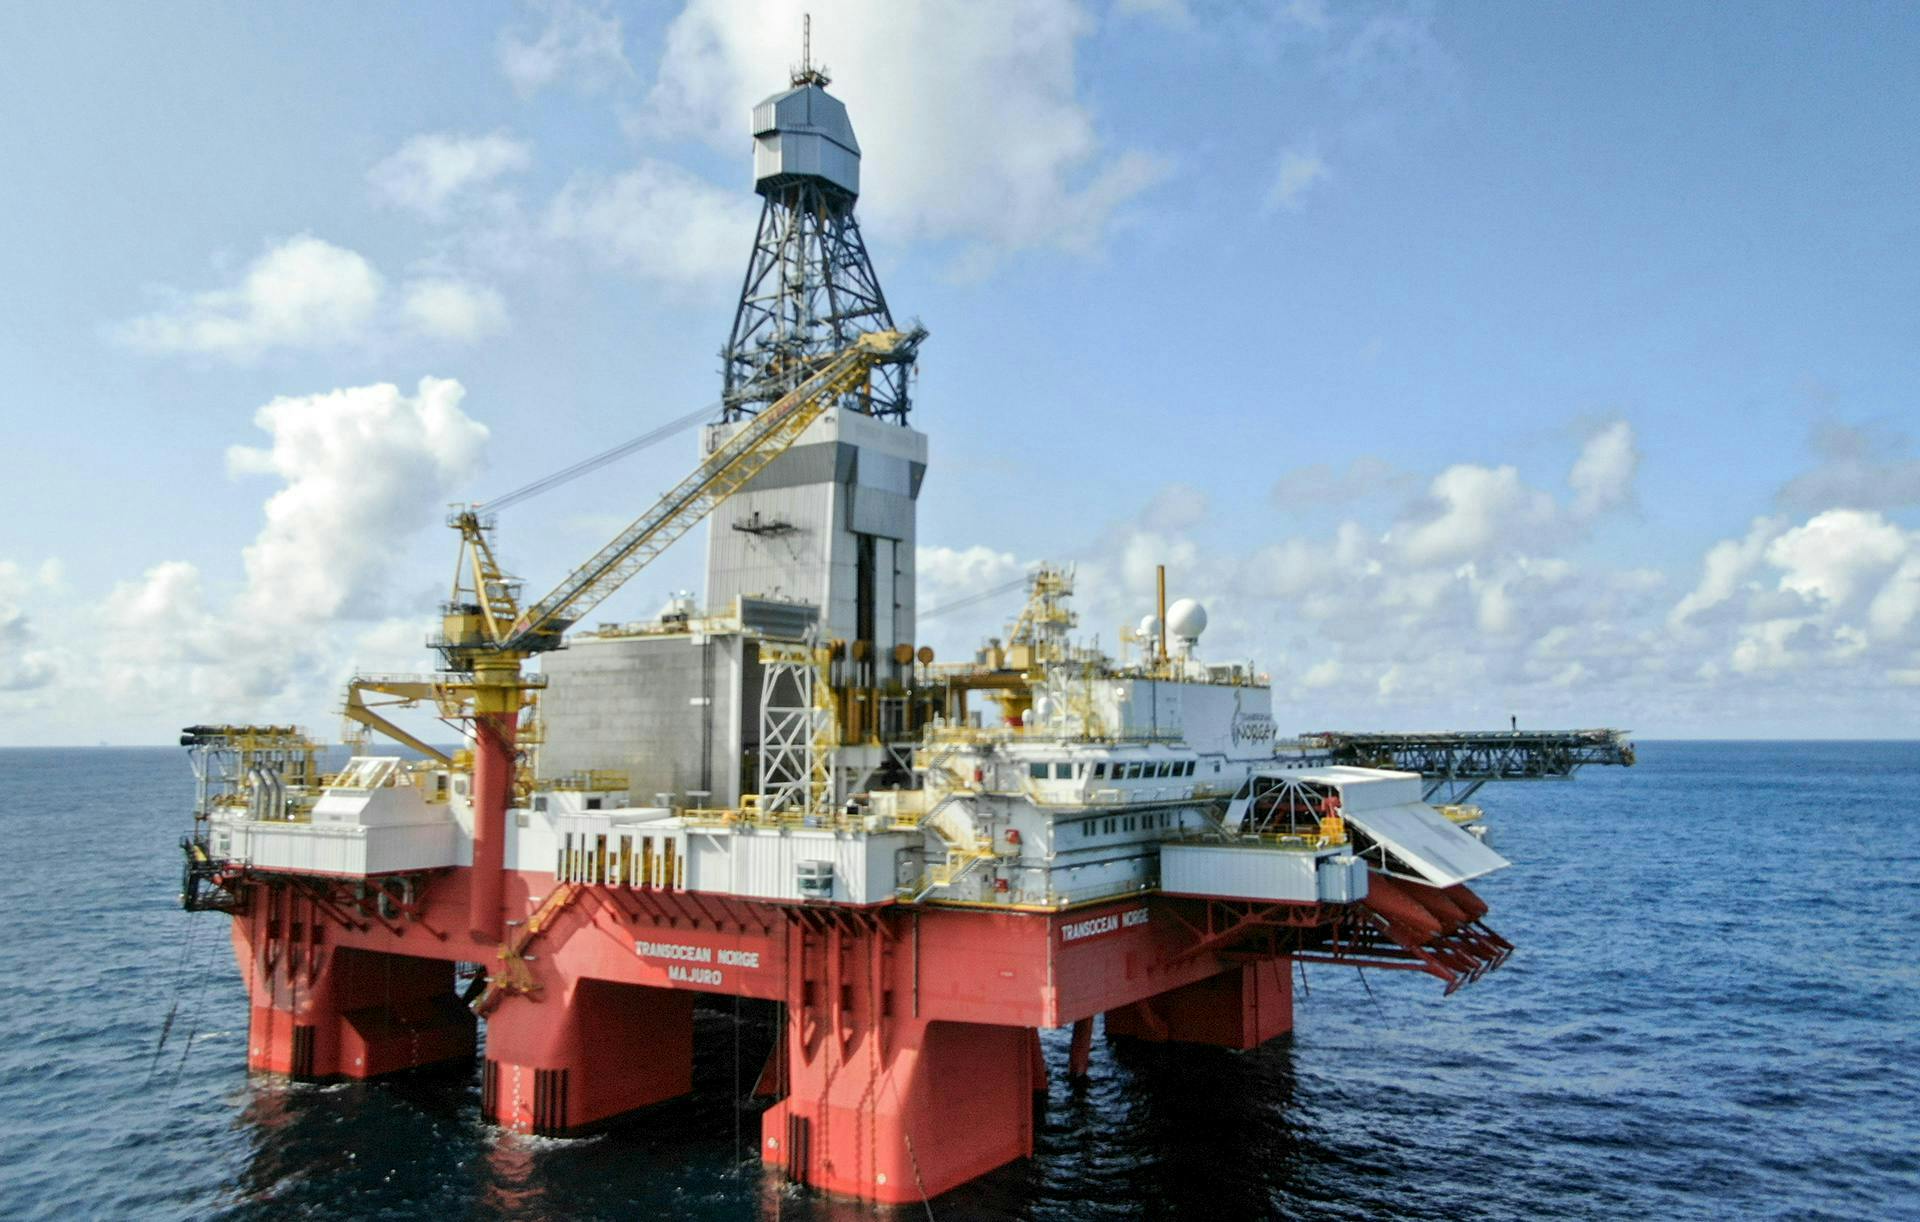 The well was drilled by the Transocean Norge drilling rig.